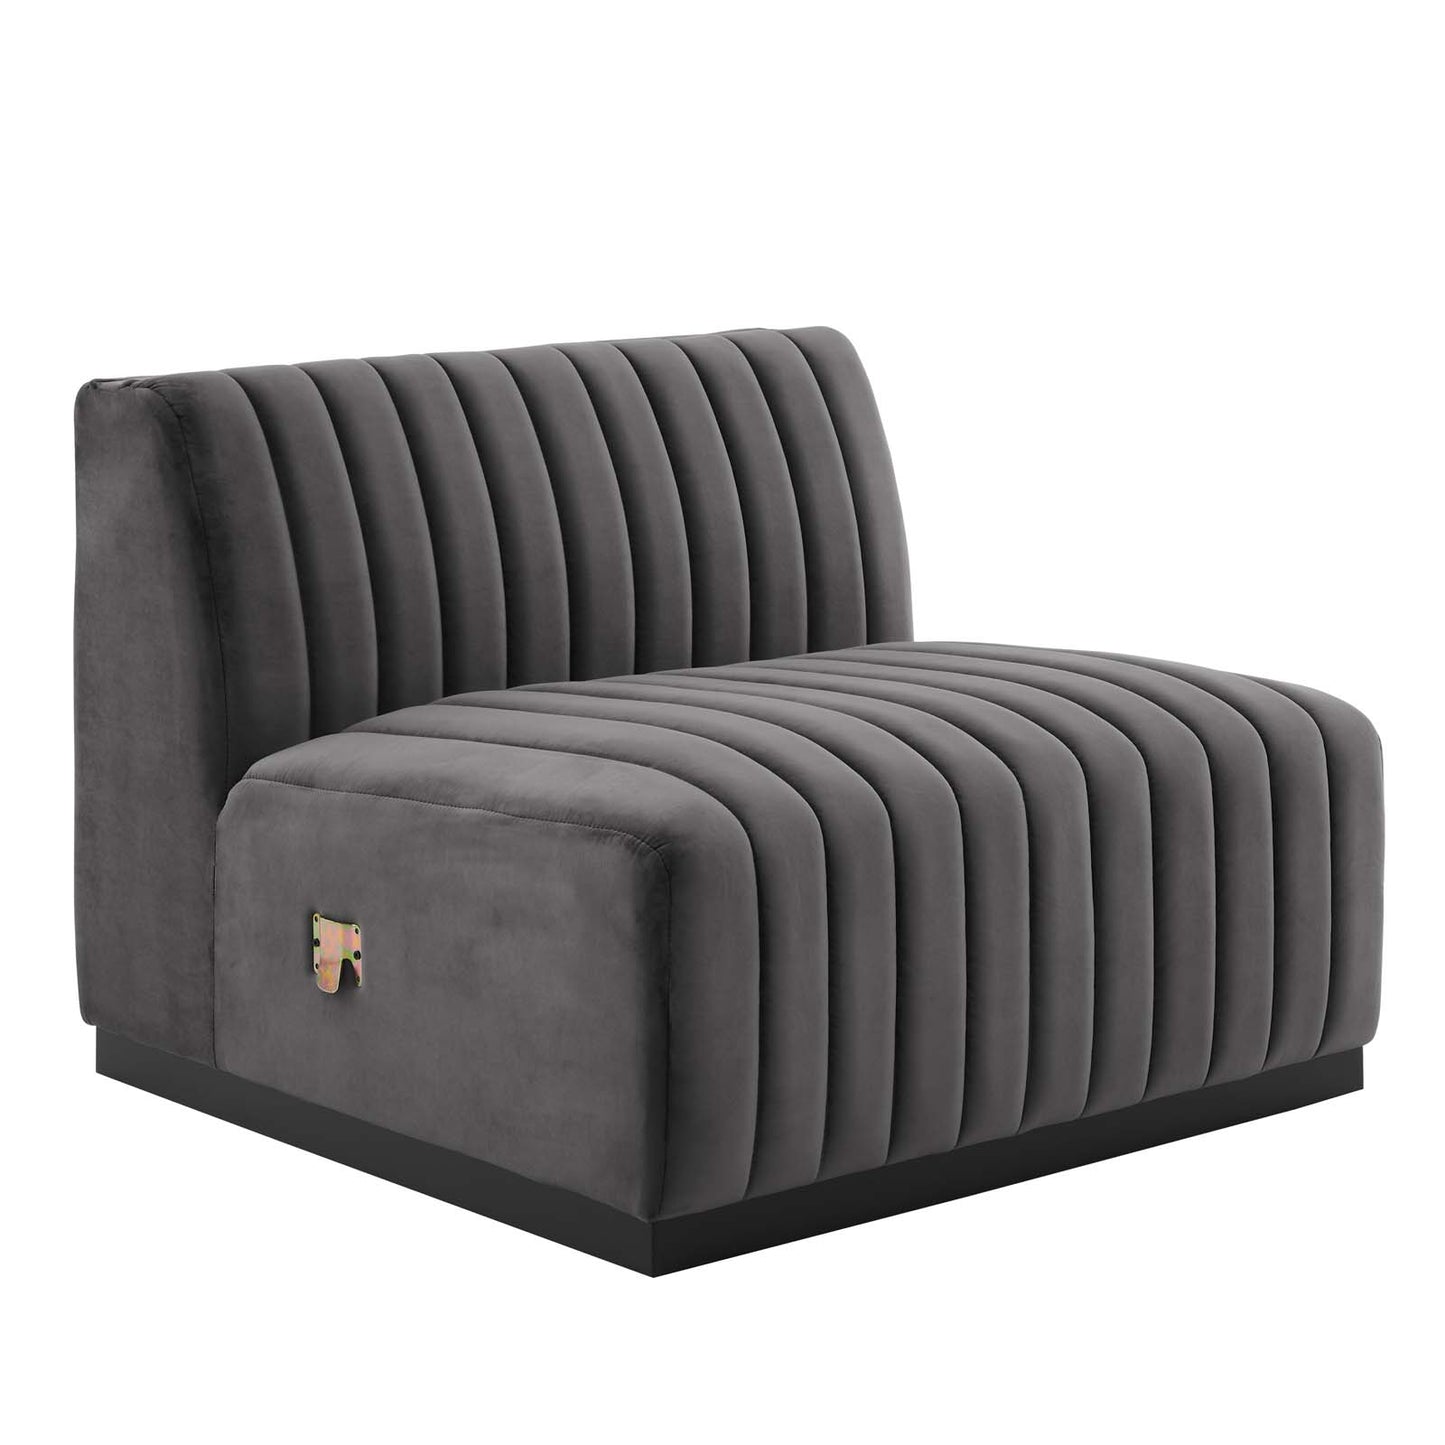 Conjure Channel Tufted Performance Velvet Sofa Black Gray EEI-5765-BLK-GRY